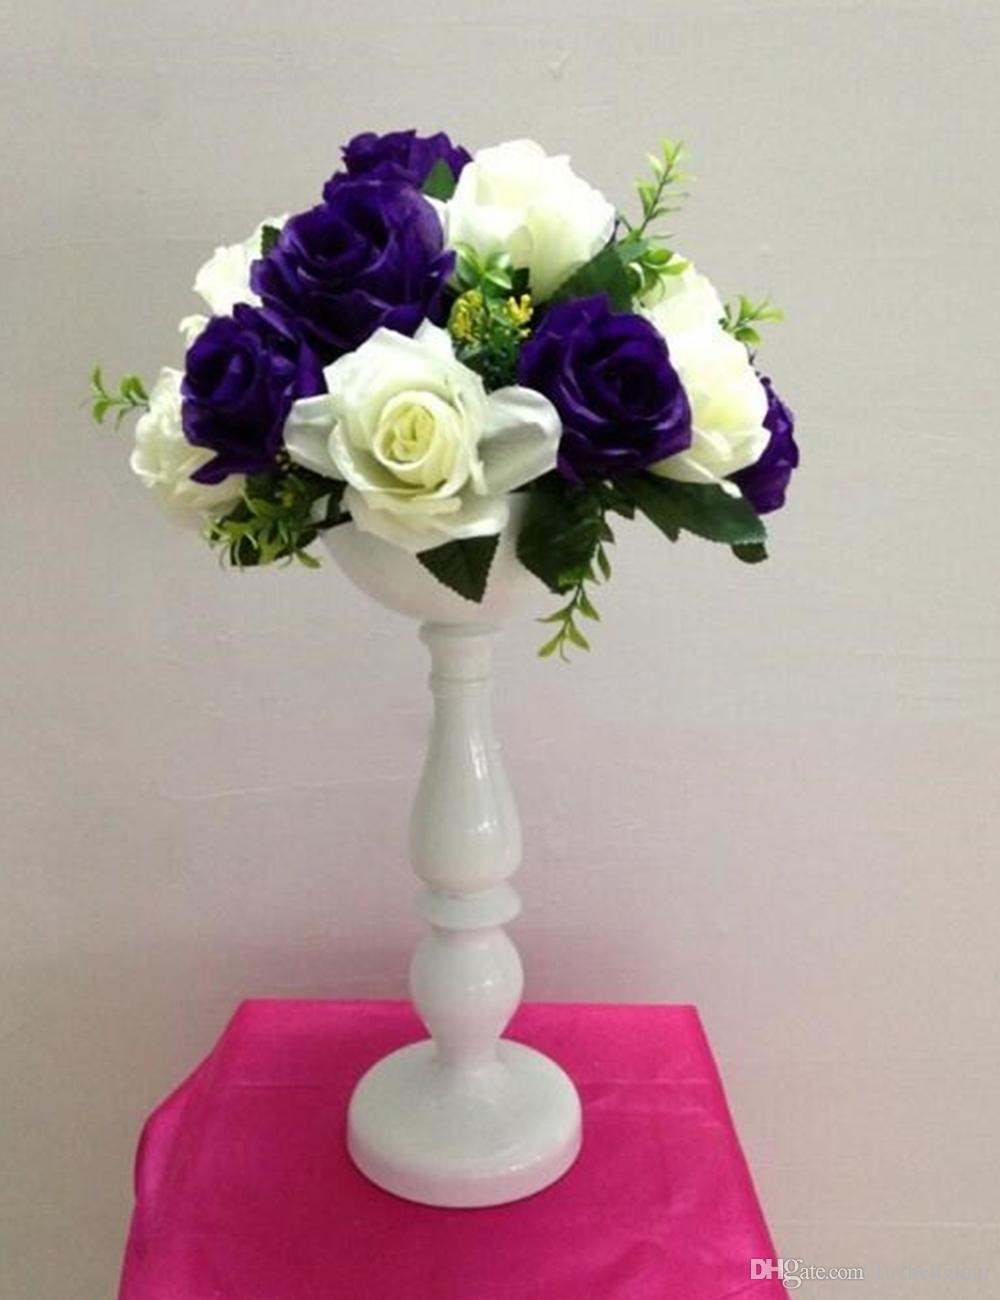 18 Cute Small Flower Vase Online 2024 free download small flower vase online of new arrive 37 cm tall white metal flower vase wedding table inside new arrive 37 cm tall white metal flower vase wedding table centerpiece event home decor hotel 